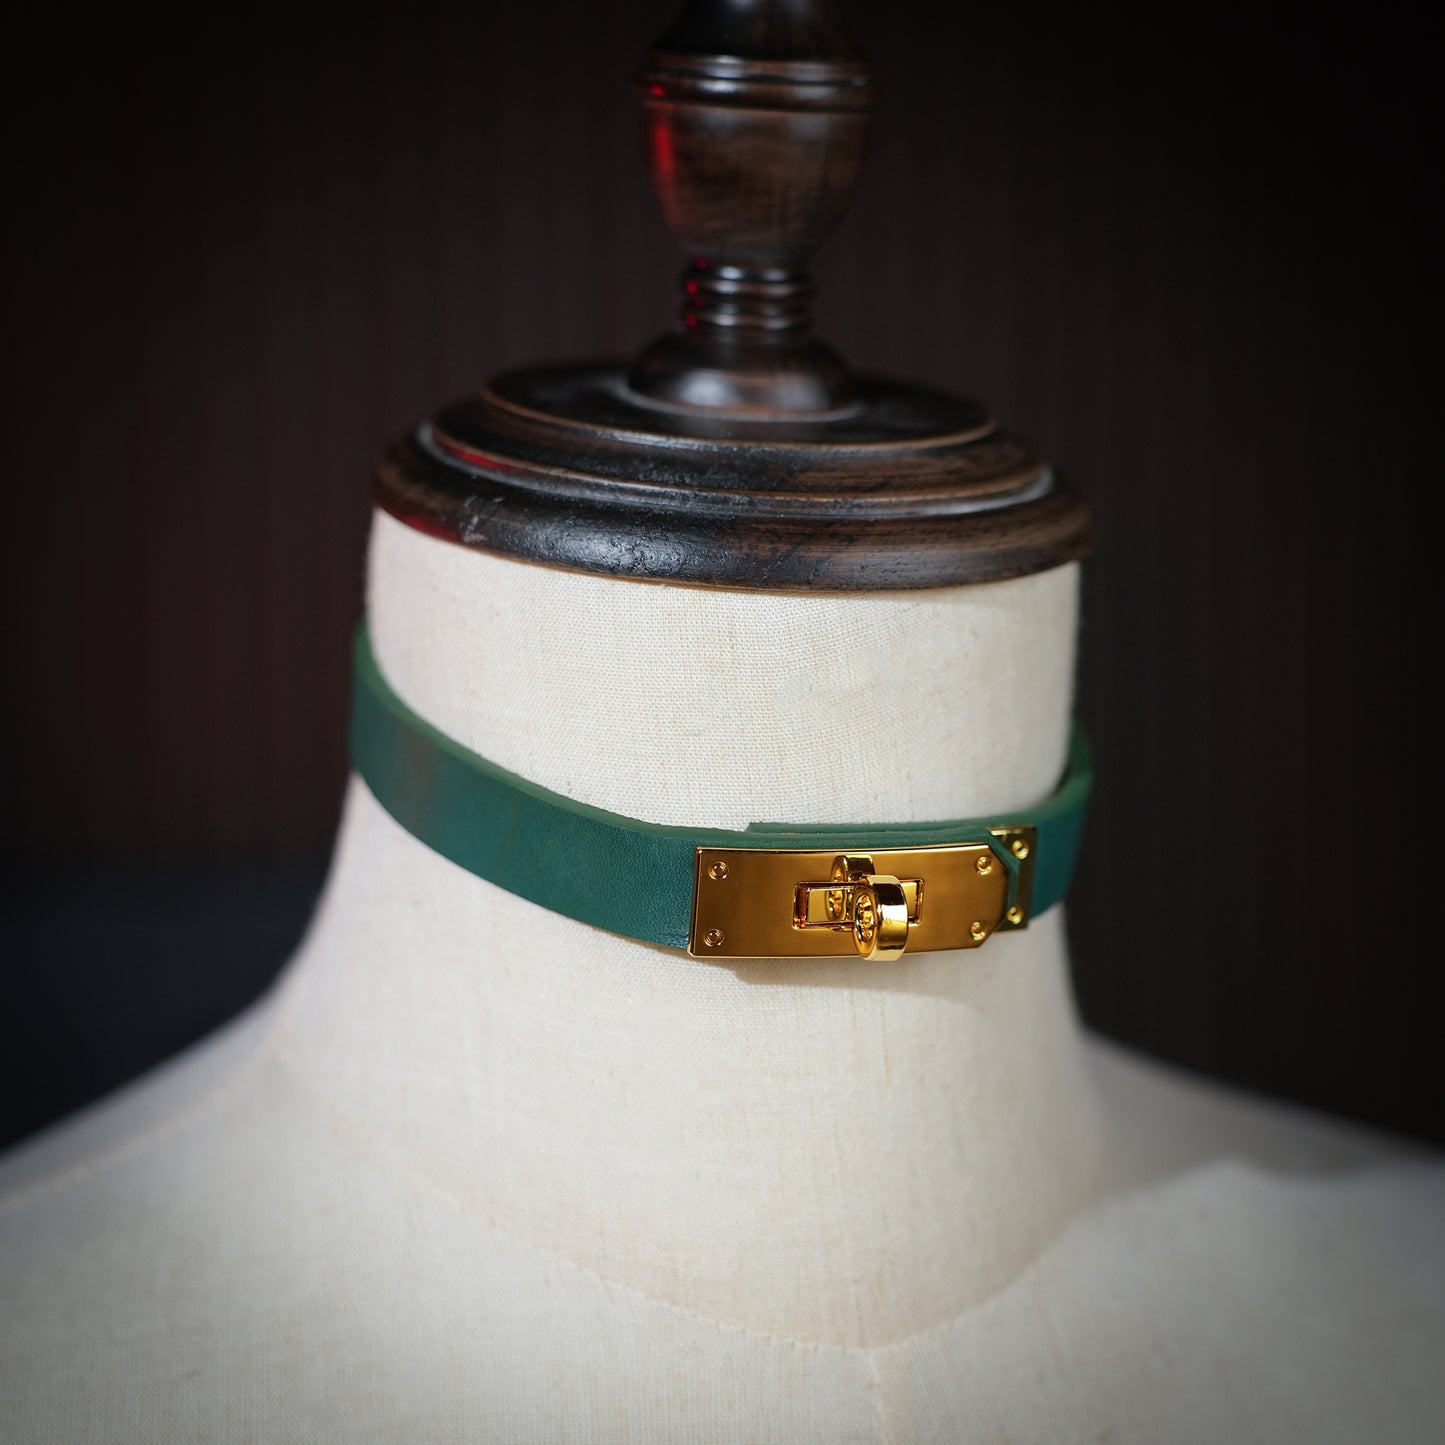 Naiads Green Leaher Choker With Leash